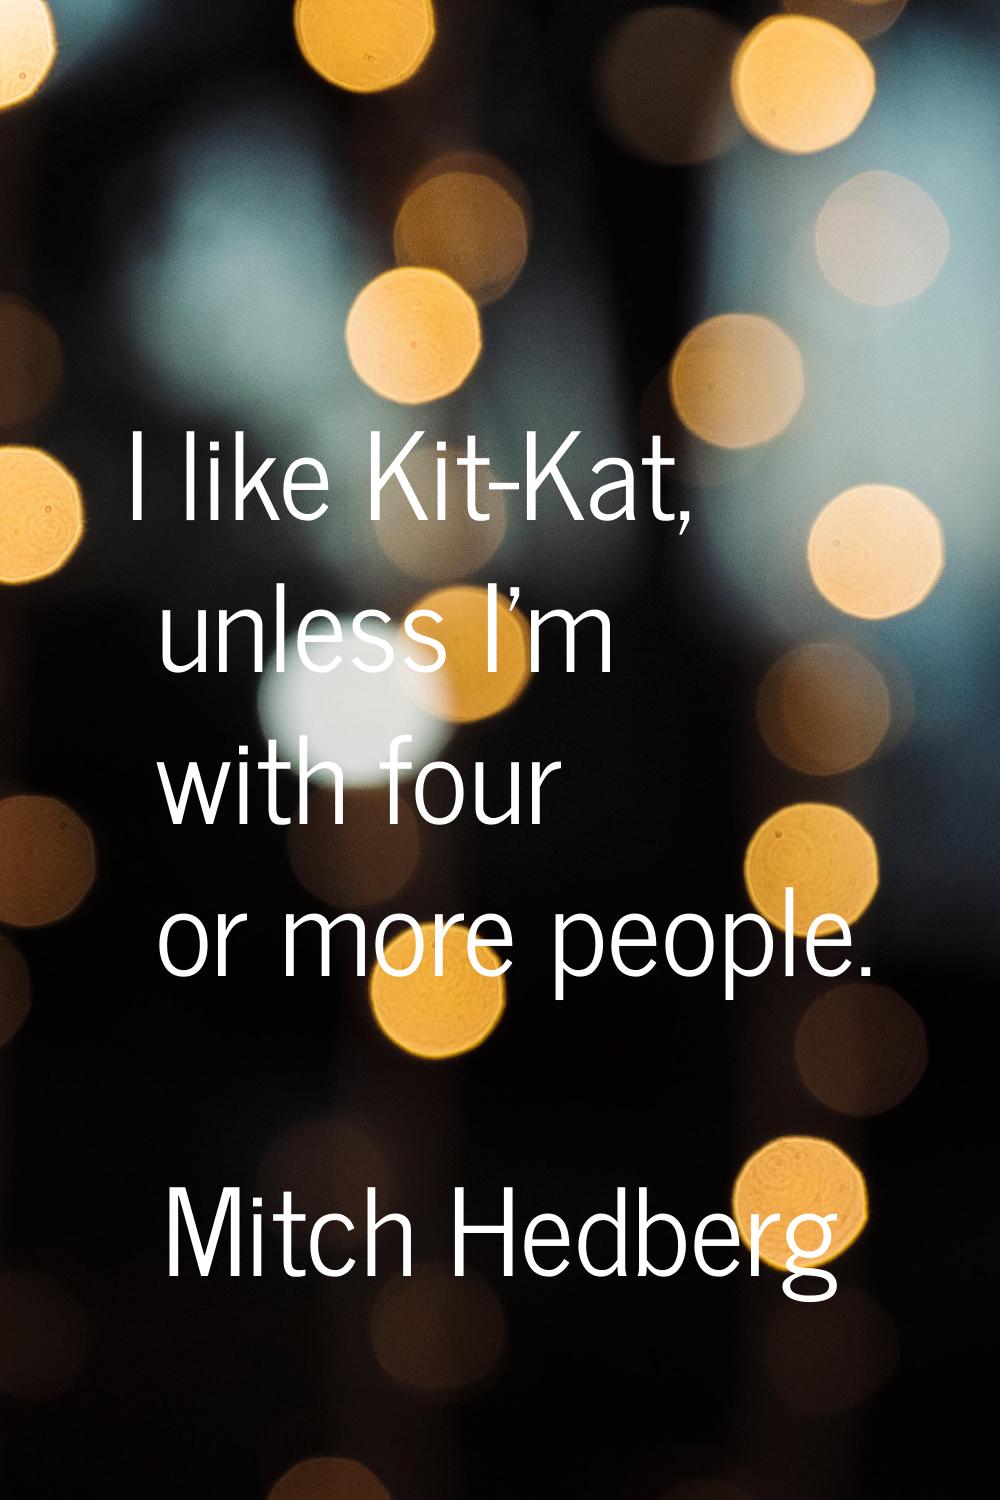 I like Kit-Kat, unless I'm with four or more people.